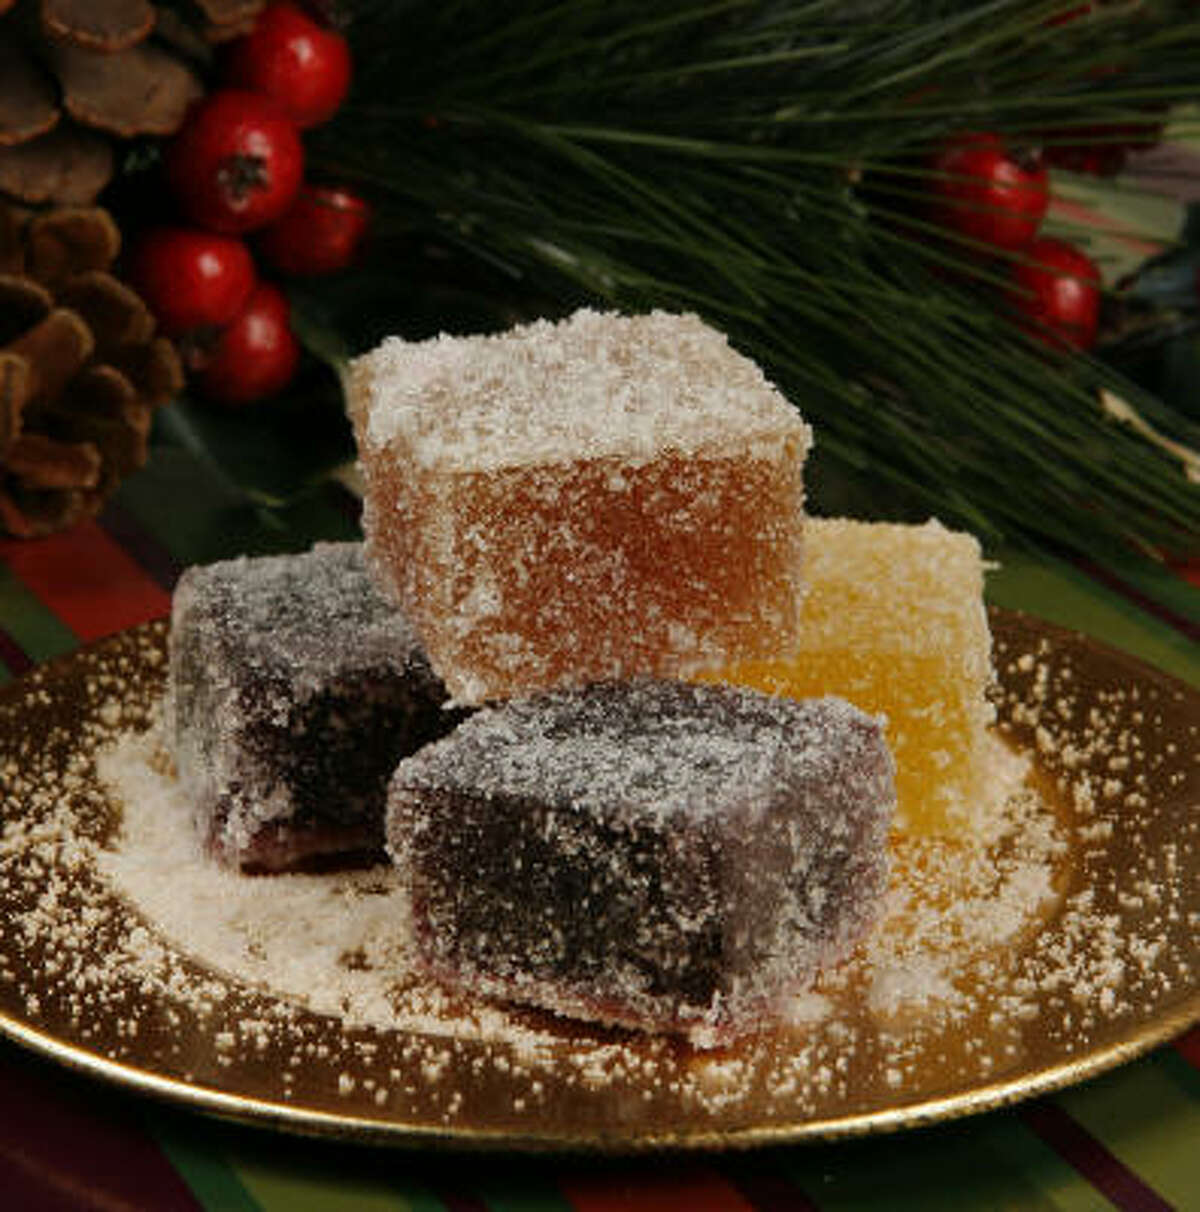 HAPPY HOLIDAYS, SUGAR: Homemade fruit jellies offer freshness and flavor you can't get with store-bought.